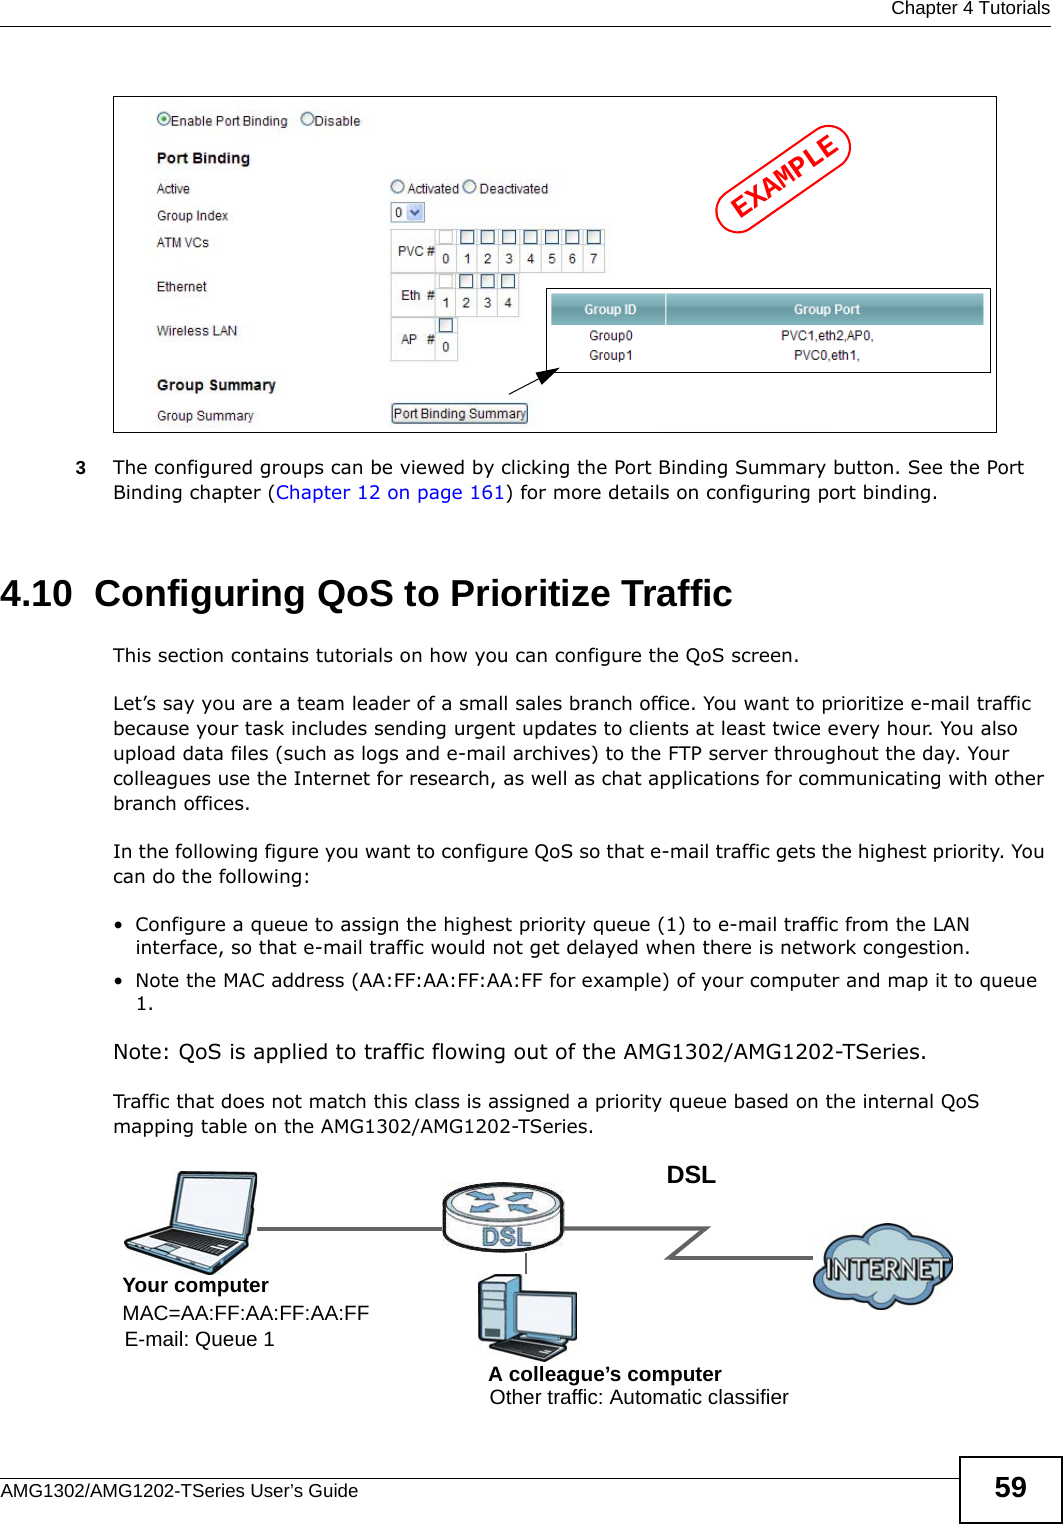  Chapter 4 TutorialsAMG1302/AMG1202-TSeries User’s Guide 593The configured groups can be viewed by clicking the Port Binding Summary button. See the Port Binding chapter (Chapter 12 on page 161) for more details on configuring port binding.4.10  Configuring QoS to Prioritize TrafficThis section contains tutorials on how you can configure the QoS screen.Let’s say you are a team leader of a small sales branch office. You want to prioritize e-mail traffic because your task includes sending urgent updates to clients at least twice every hour. You also upload data files (such as logs and e-mail archives) to the FTP server throughout the day. Your colleagues use the Internet for research, as well as chat applications for communicating with other branch offices.In the following figure you want to configure QoS so that e-mail traffic gets the highest priority. You can do the following:• Configure a queue to assign the highest priority queue (1) to e-mail traffic from the LAN interface, so that e-mail traffic would not get delayed when there is network congestion. • Note the MAC address (AA:FF:AA:FF:AA:FF for example) of your computer and map it to queue 1. Note: QoS is applied to traffic flowing out of the AMG1302/AMG1202-TSeries.Traffic that does not match this class is assigned a priority queue based on the internal QoS mapping table on the AMG1302/AMG1202-TSeries.EXAMPLEDSLE-mail: Queue 1Your computerA colleague’s computer Other traffic: Automatic classifierMAC=AA:FF:AA:FF:AA:FF